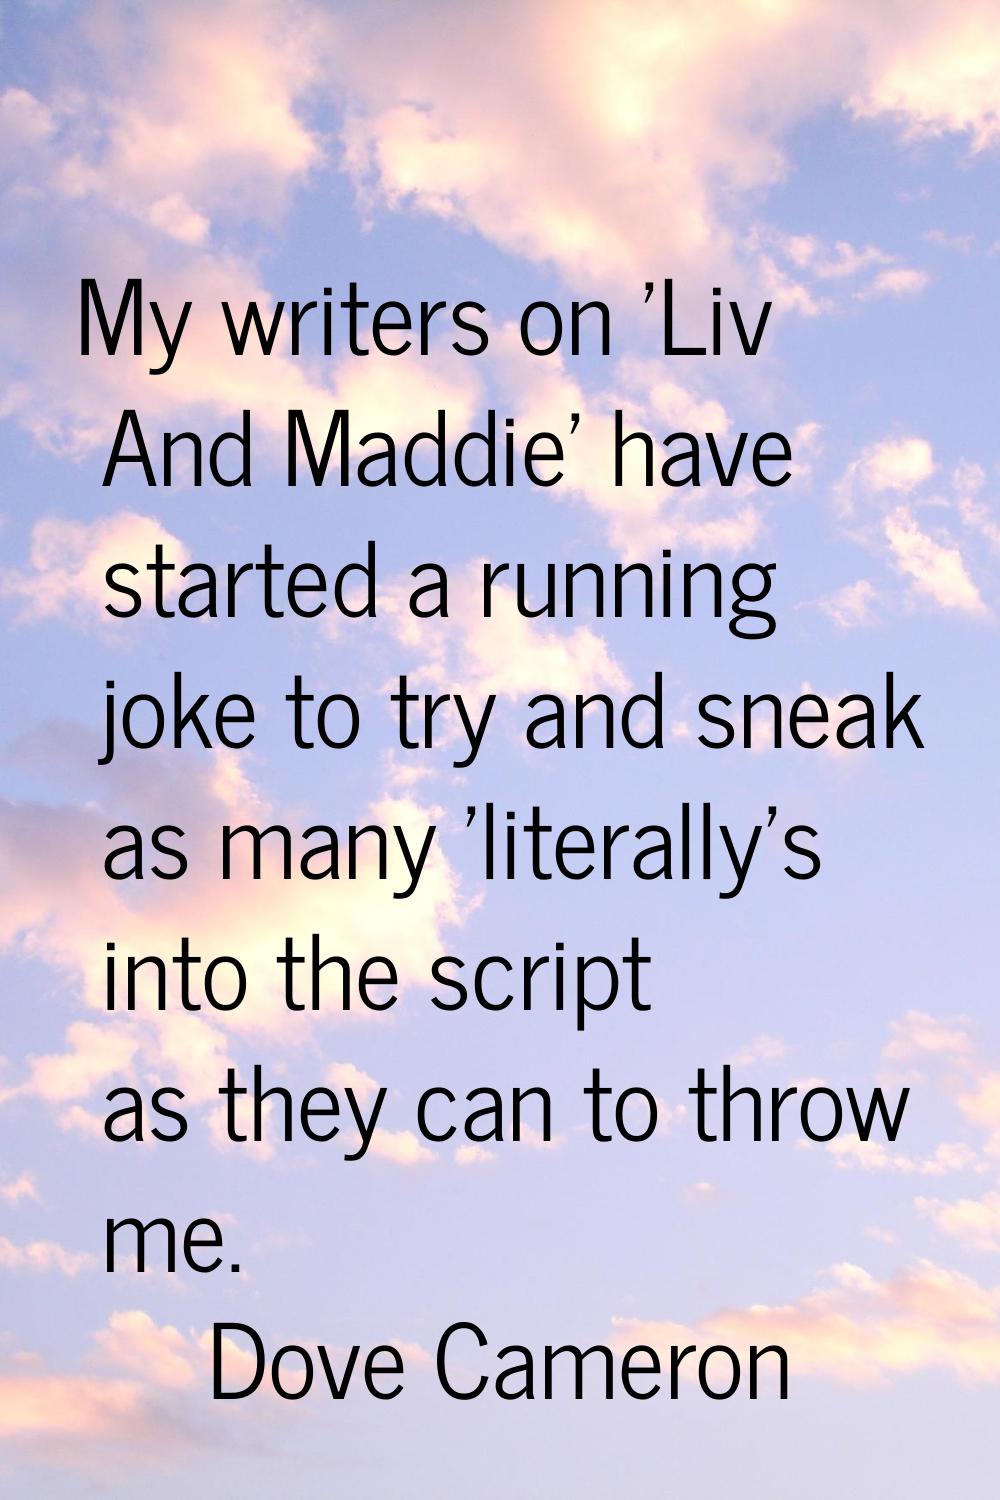 My writers on 'Liv And Maddie' have started a running joke to try and sneak as many 'literally's in